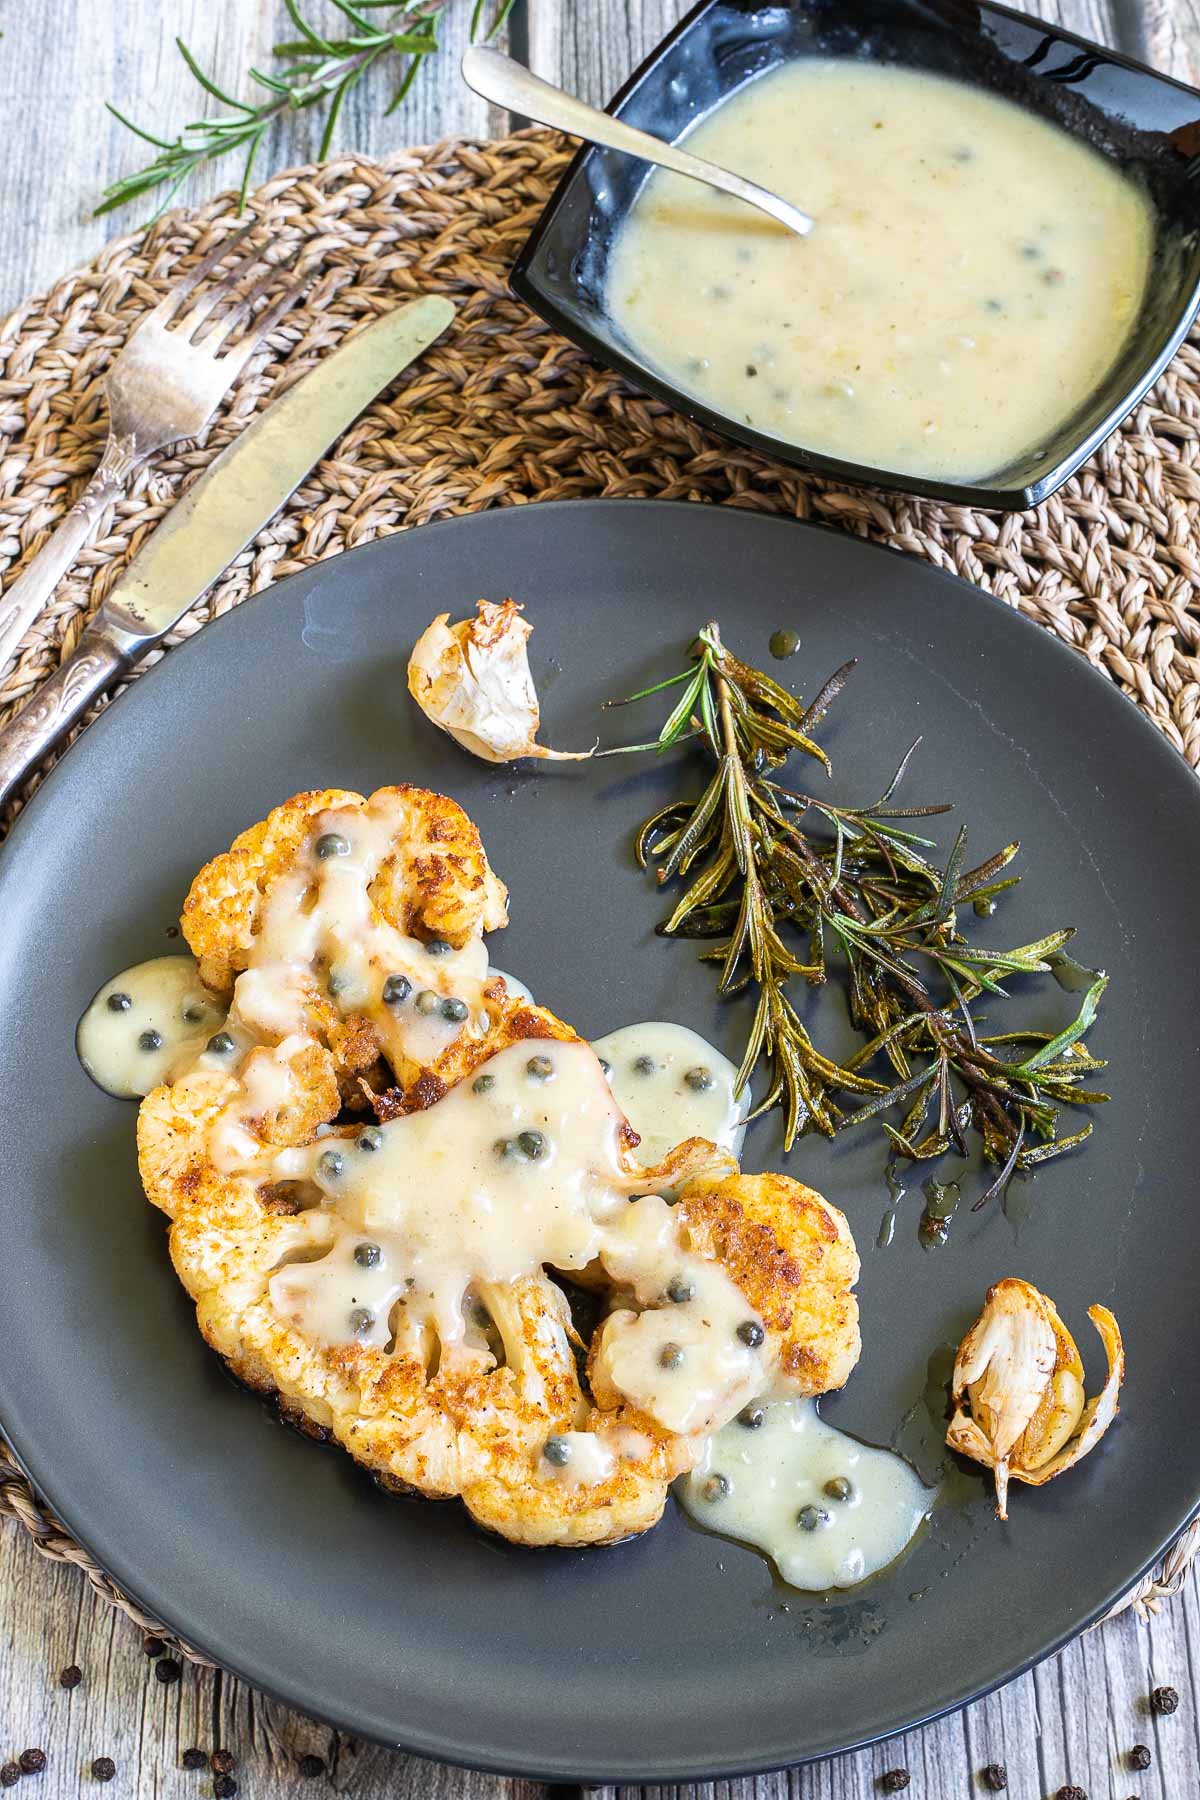 Black plate with a large slice of cauliflower drizzled with green peppercorn sauce. Roasted garlic and rosemary are placed next to it. There is a small black bowl of the remaining sauce. 